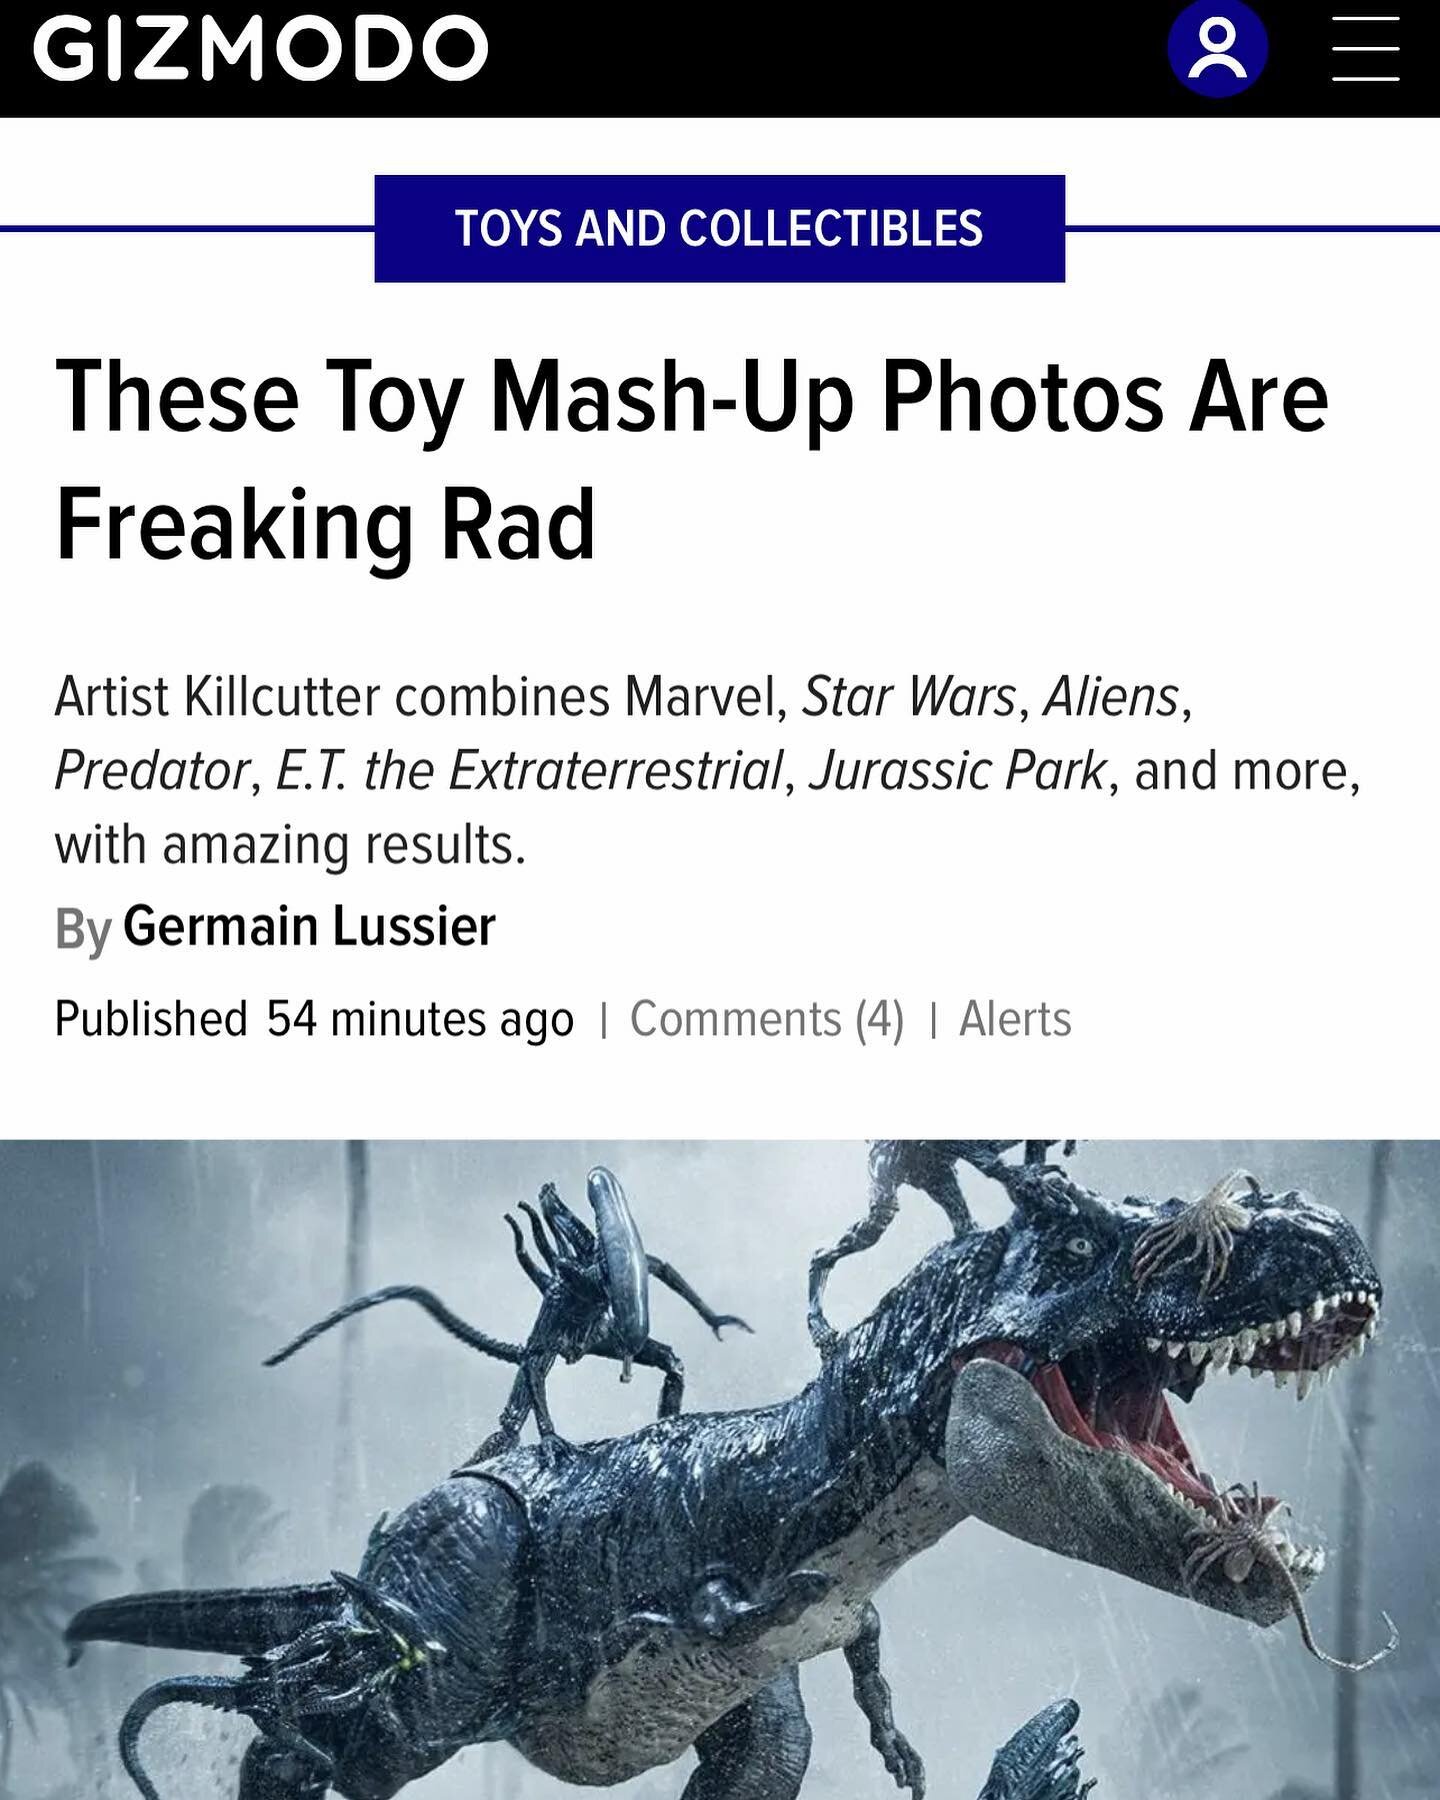 What an honor to have some of my recent mashup toy photos featured on @gizmodo today!  I got a chance to work with the awesome @germainlussier and truly appreciate the kind words and support he&rsquo;s given my art. Go check it out! (link in bio) 
.
